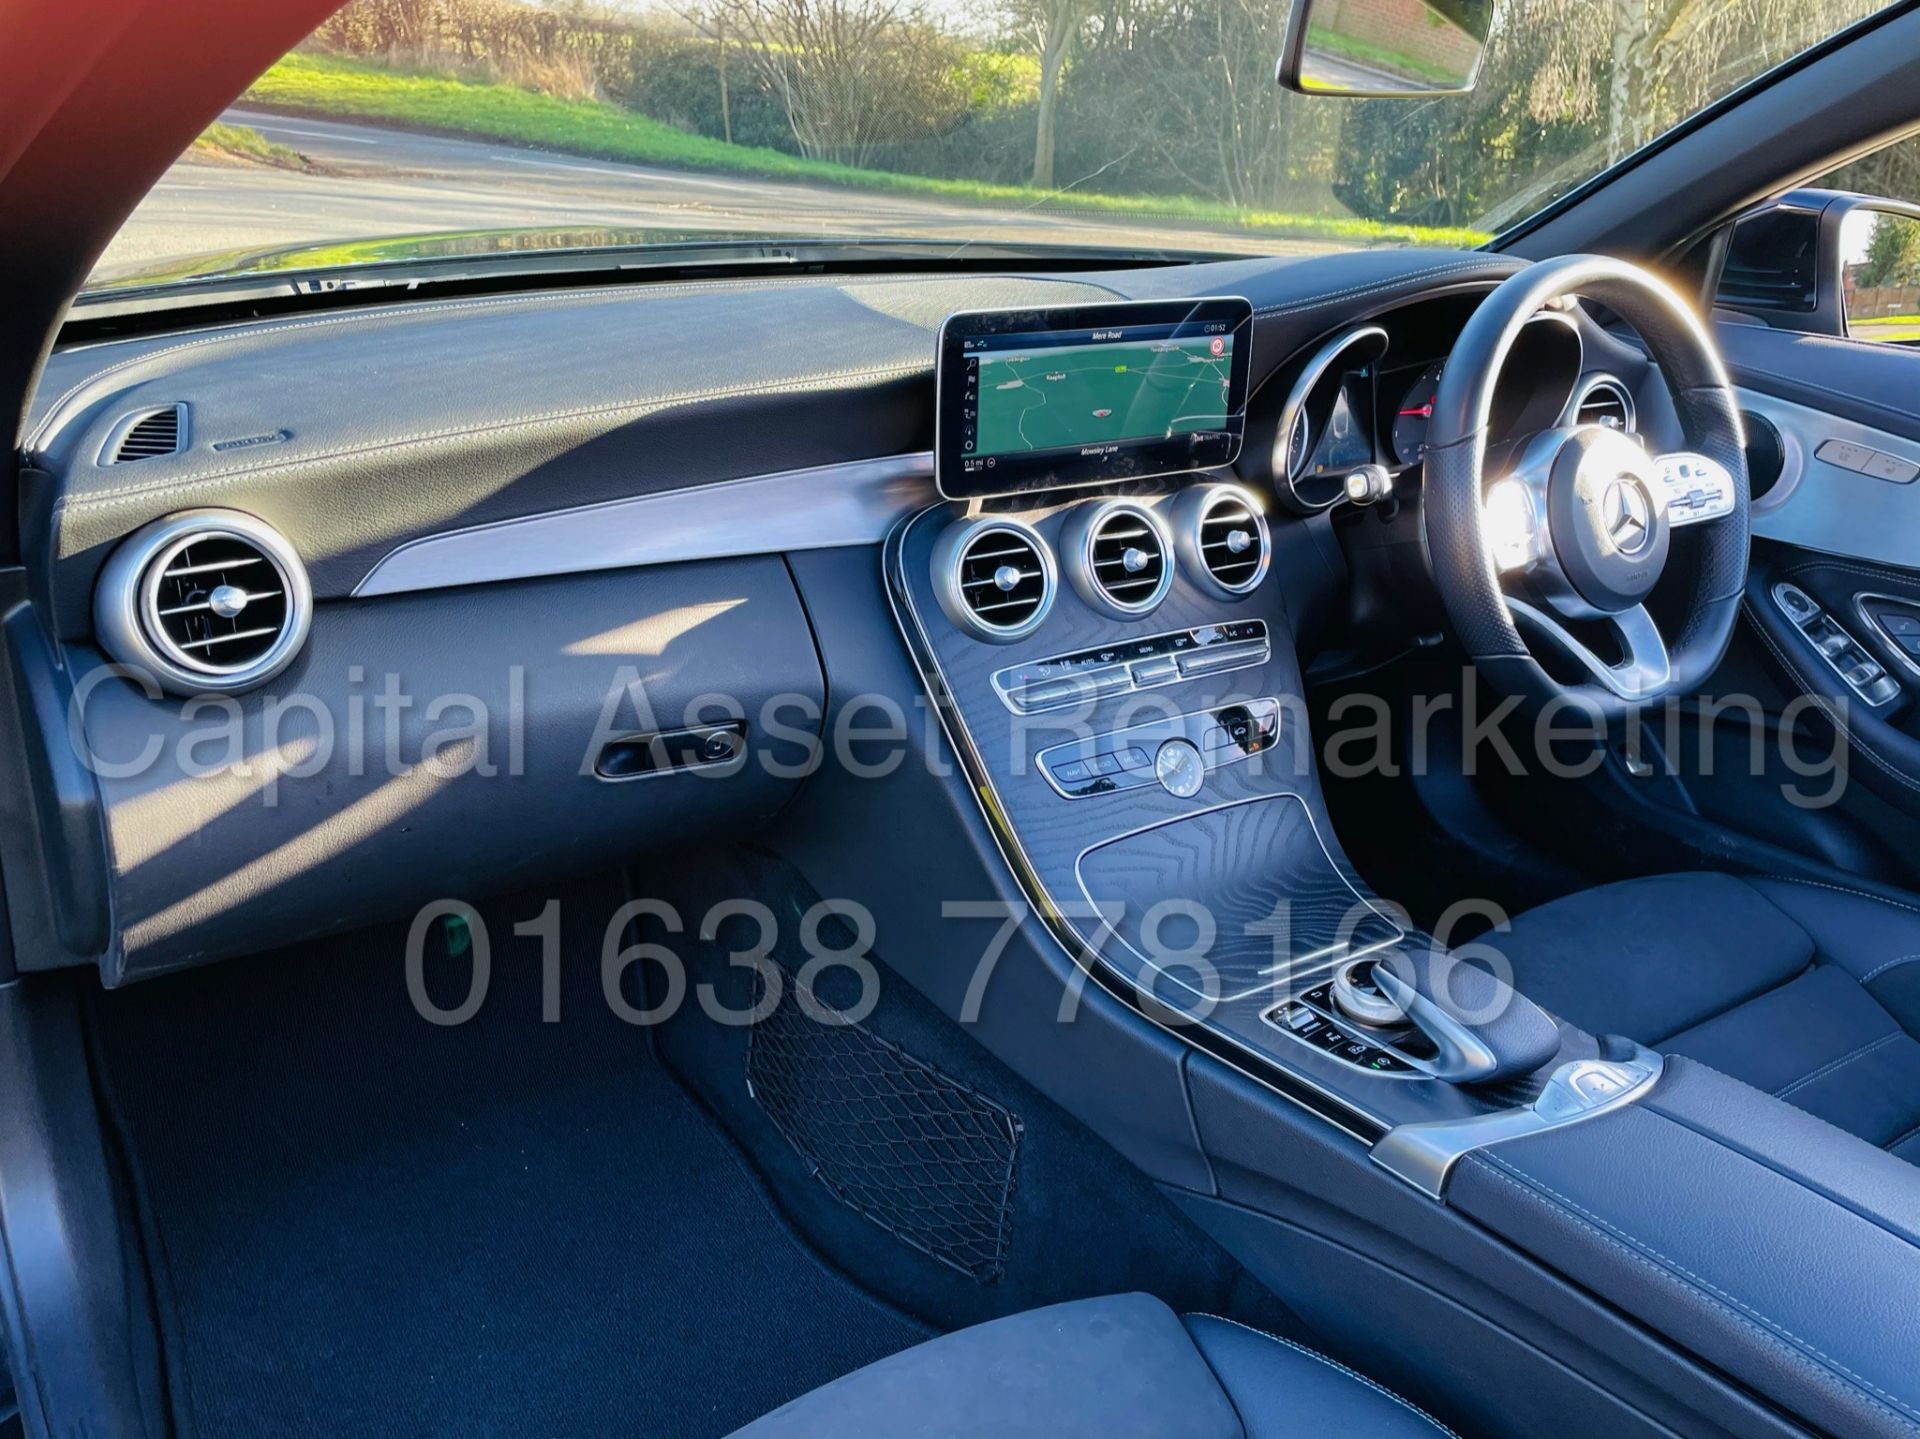 ON SALE MERCEDES-BENZ C220D *AMG LINE - CABRIOLET* (2019) '9G TRONIC AUTO - LEATHER - SAT NAV' - Image 34 of 59